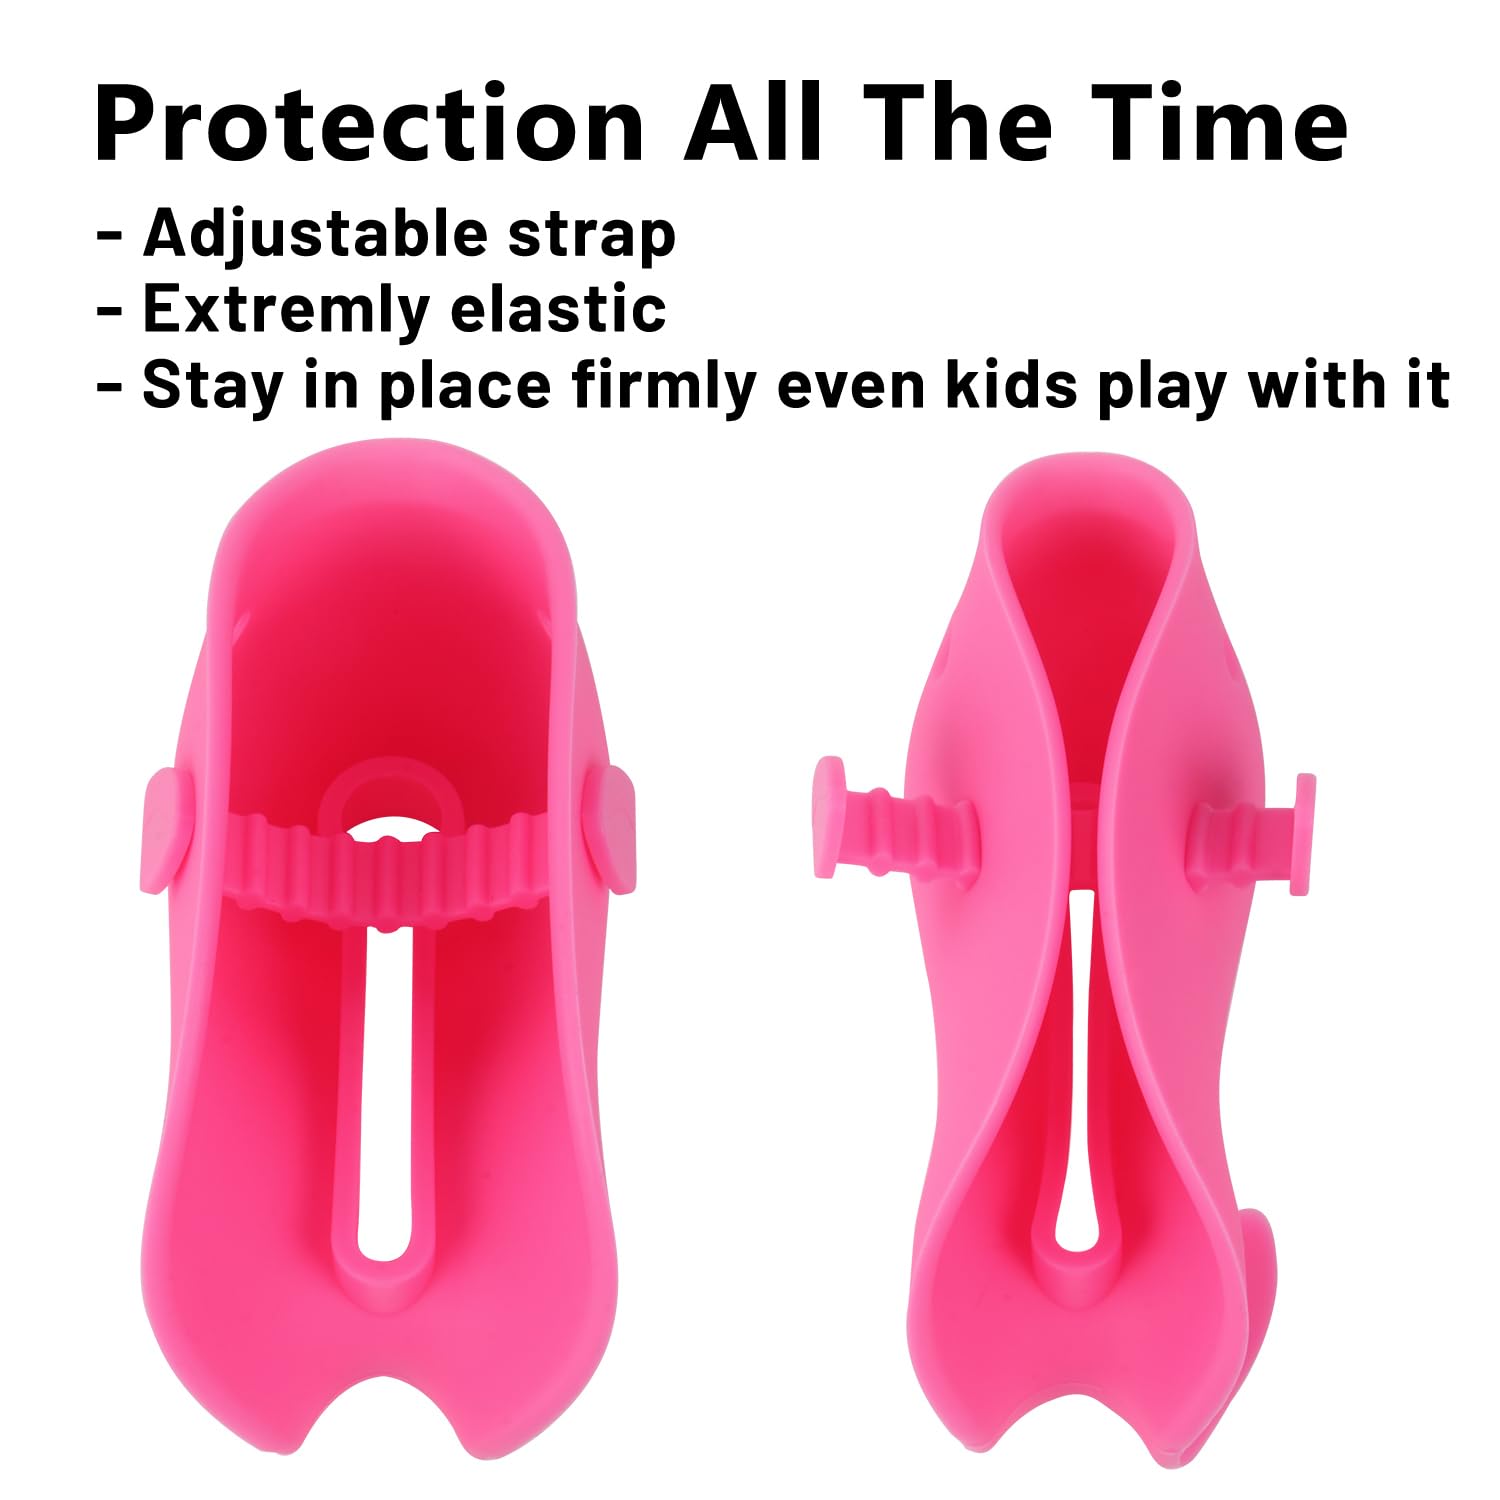 Bath Spout Cover, Faucet Cover Baby Bathroom Tub Faucet Cover Protector for Kids, Bathtub Spout Cover for Baby Kids Toddlers Protection Accessories Baby Safety Universal Bath Silicone Toys Whale Pink